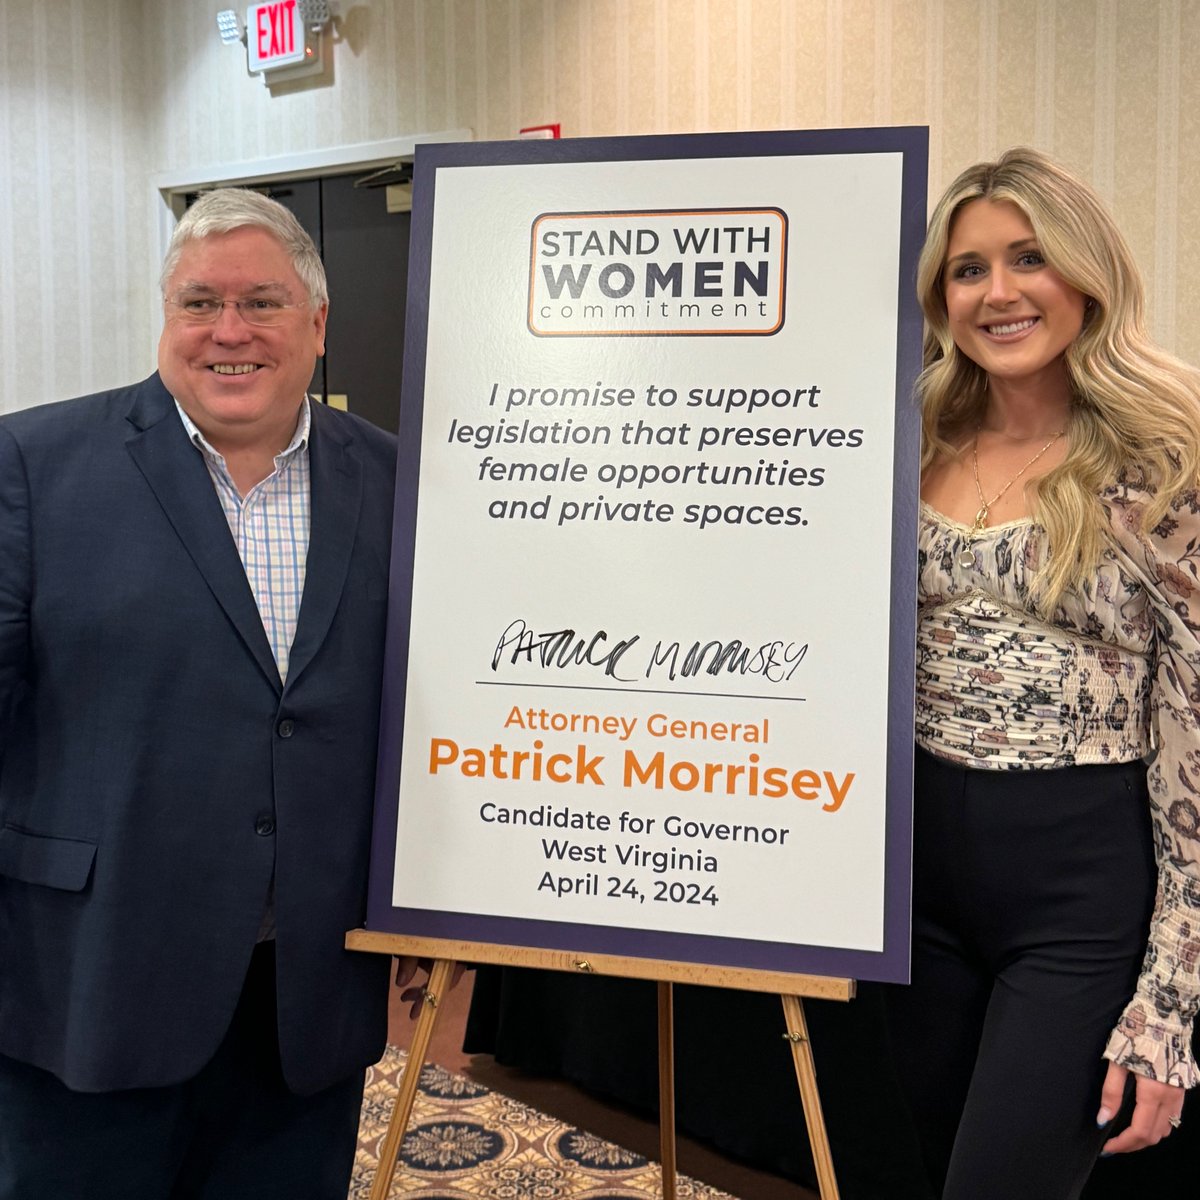 BREAKING: West Virginia Attorney General & Candidate for Governor Patrick Morrisey, @MorriseyPress, signs IWV’s Stand With Women Commitment, committing to upholding laws that preserve female opportunities & private spaces! iwv.org/2024/04/west-v…